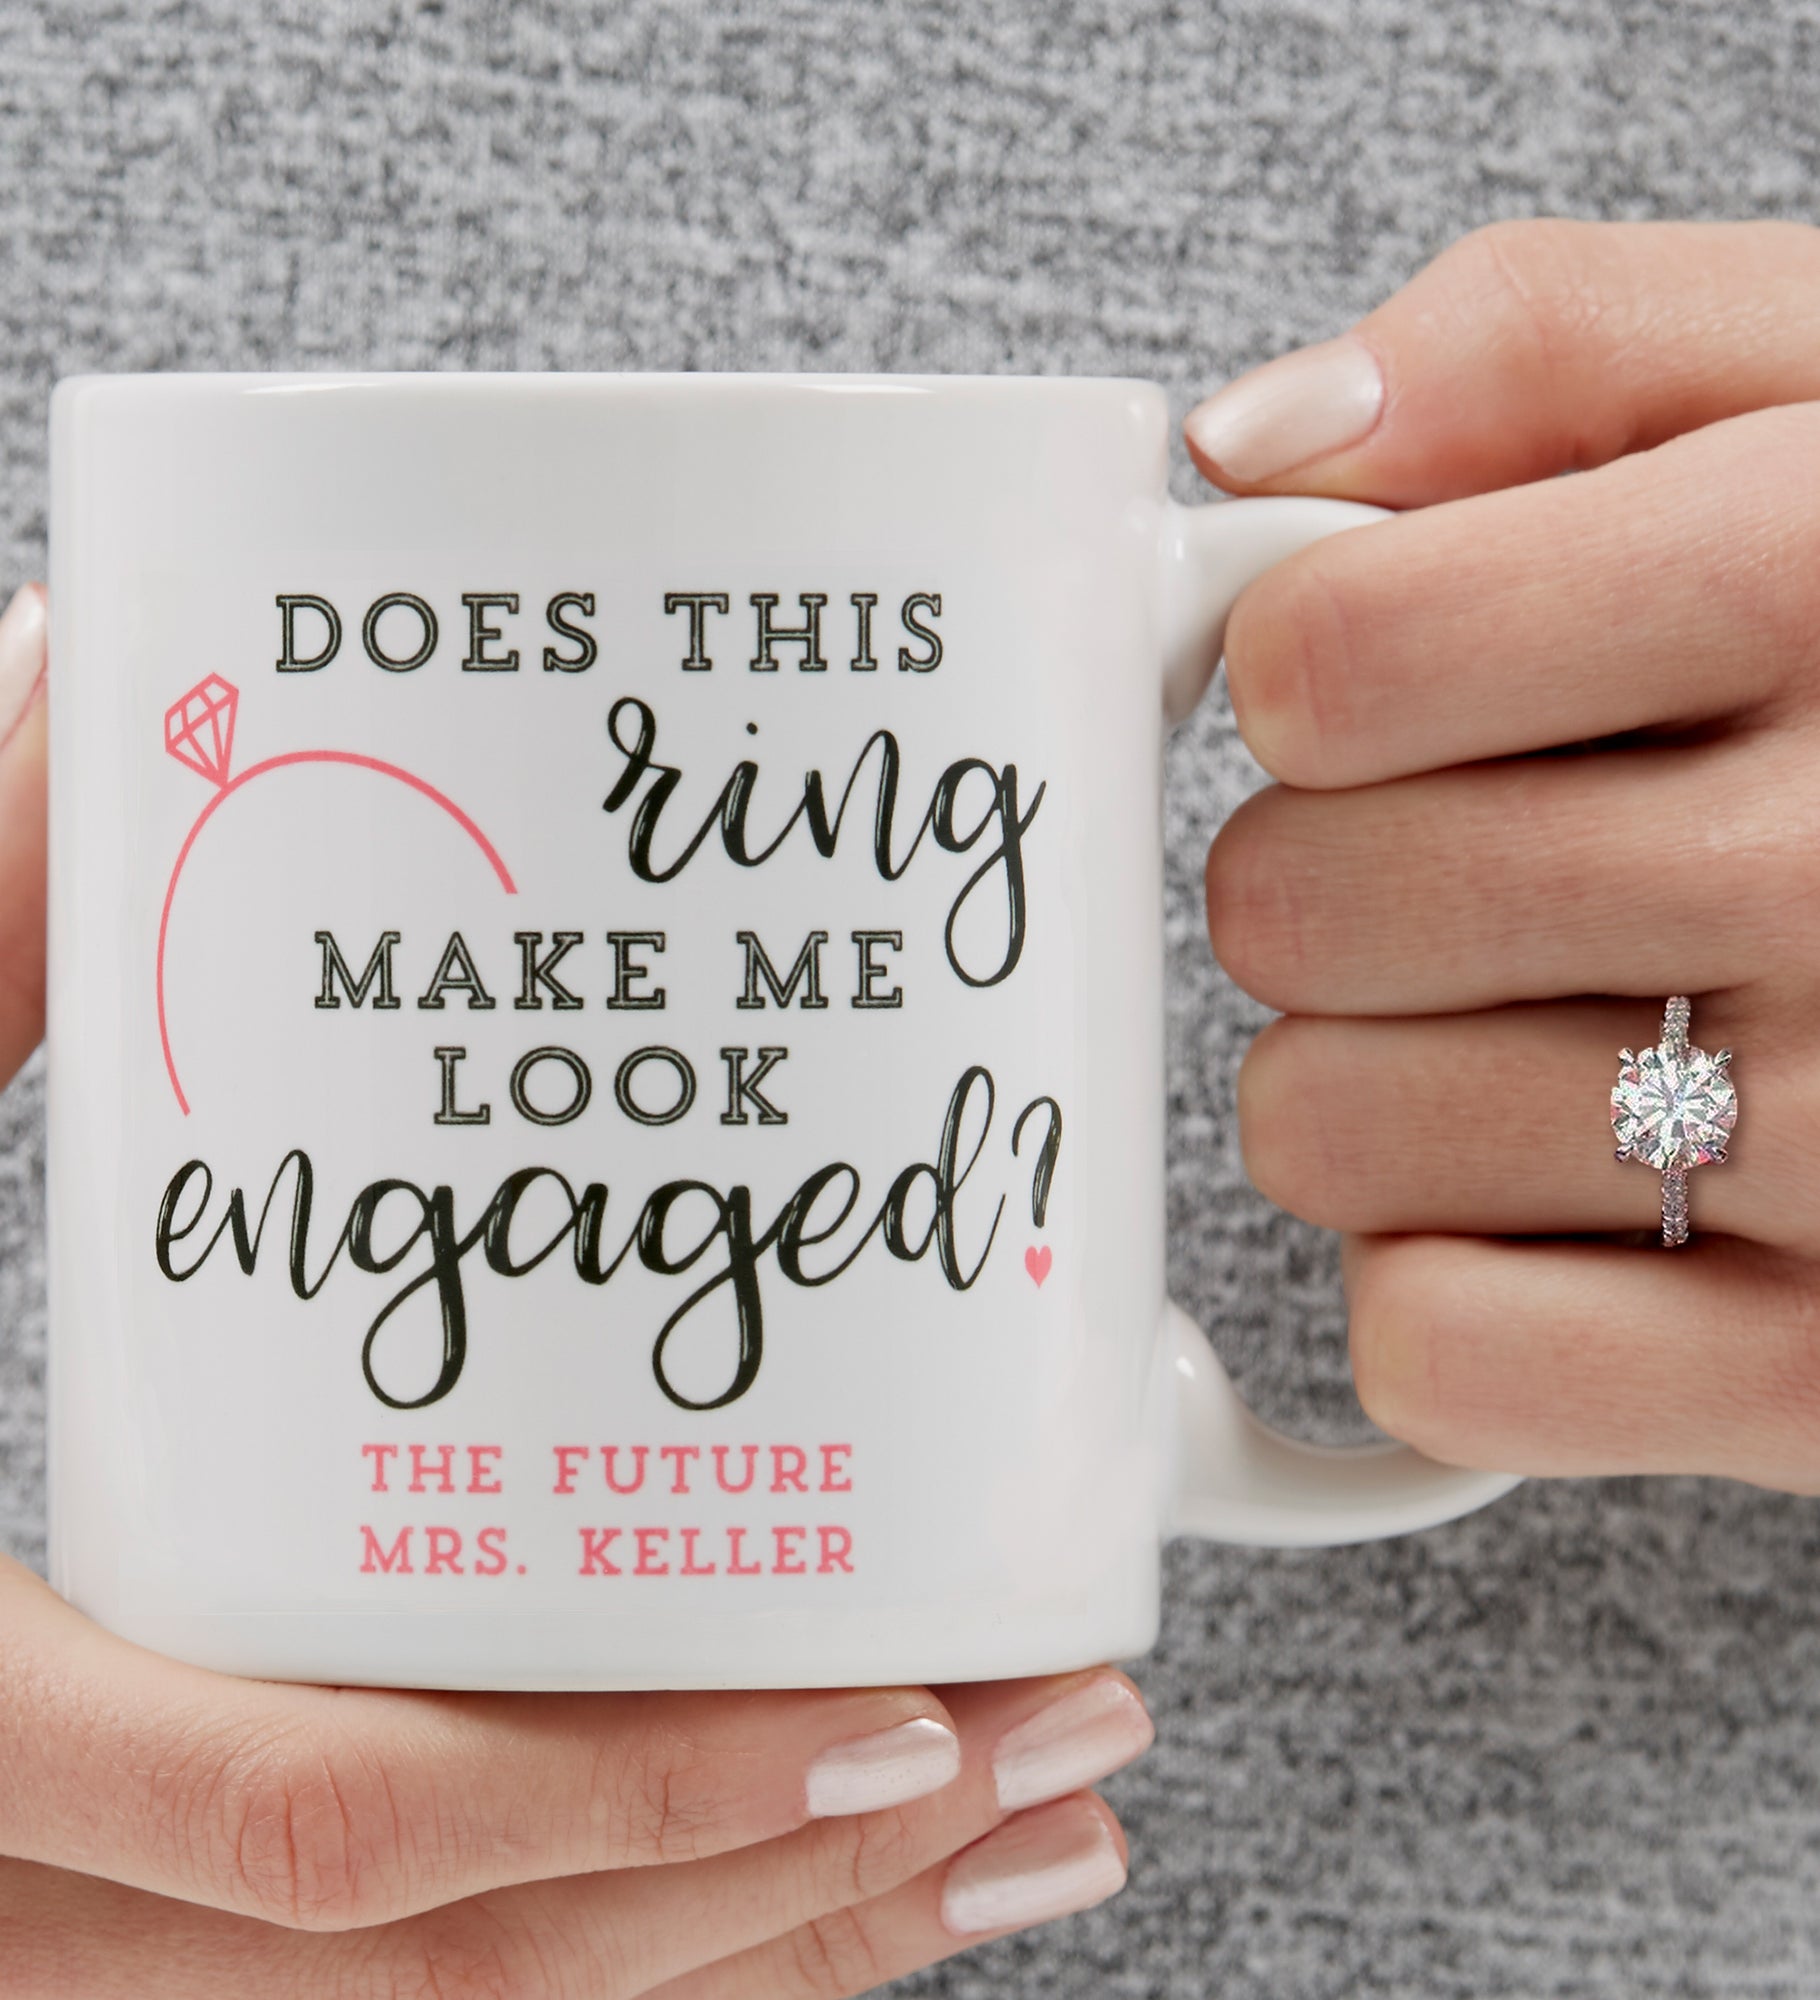 Do I Look Engaged? Personalized Coffee Mugs